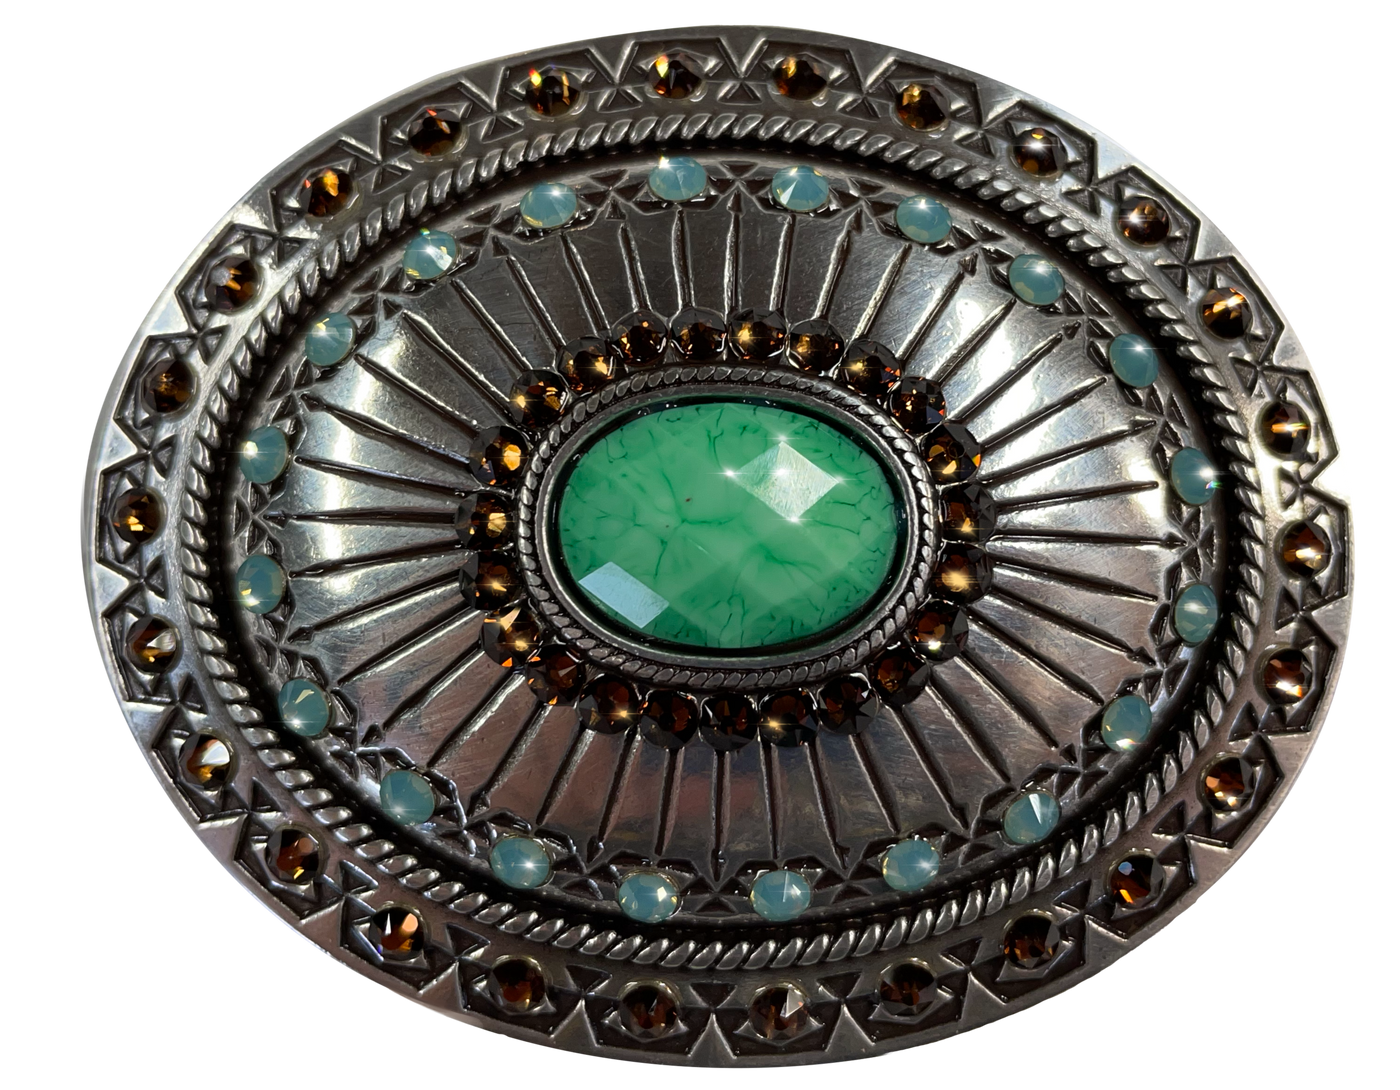 This oval buckle by Nocona's Blazin' Roxx measures 2 1/2" tall by 3" wide. Background color is chrome.  It has a decorative turquoise colored stone in the center surrounded by brown crystals, Lines radiate from the center outward and more turquoise colored crystals are then around the buckle with a rope design separating them from the edge of the buckle, which has another row of brown crystals in the design.  Available online and in our retail shop in Smyrna, TN, just outside of Nashville. 